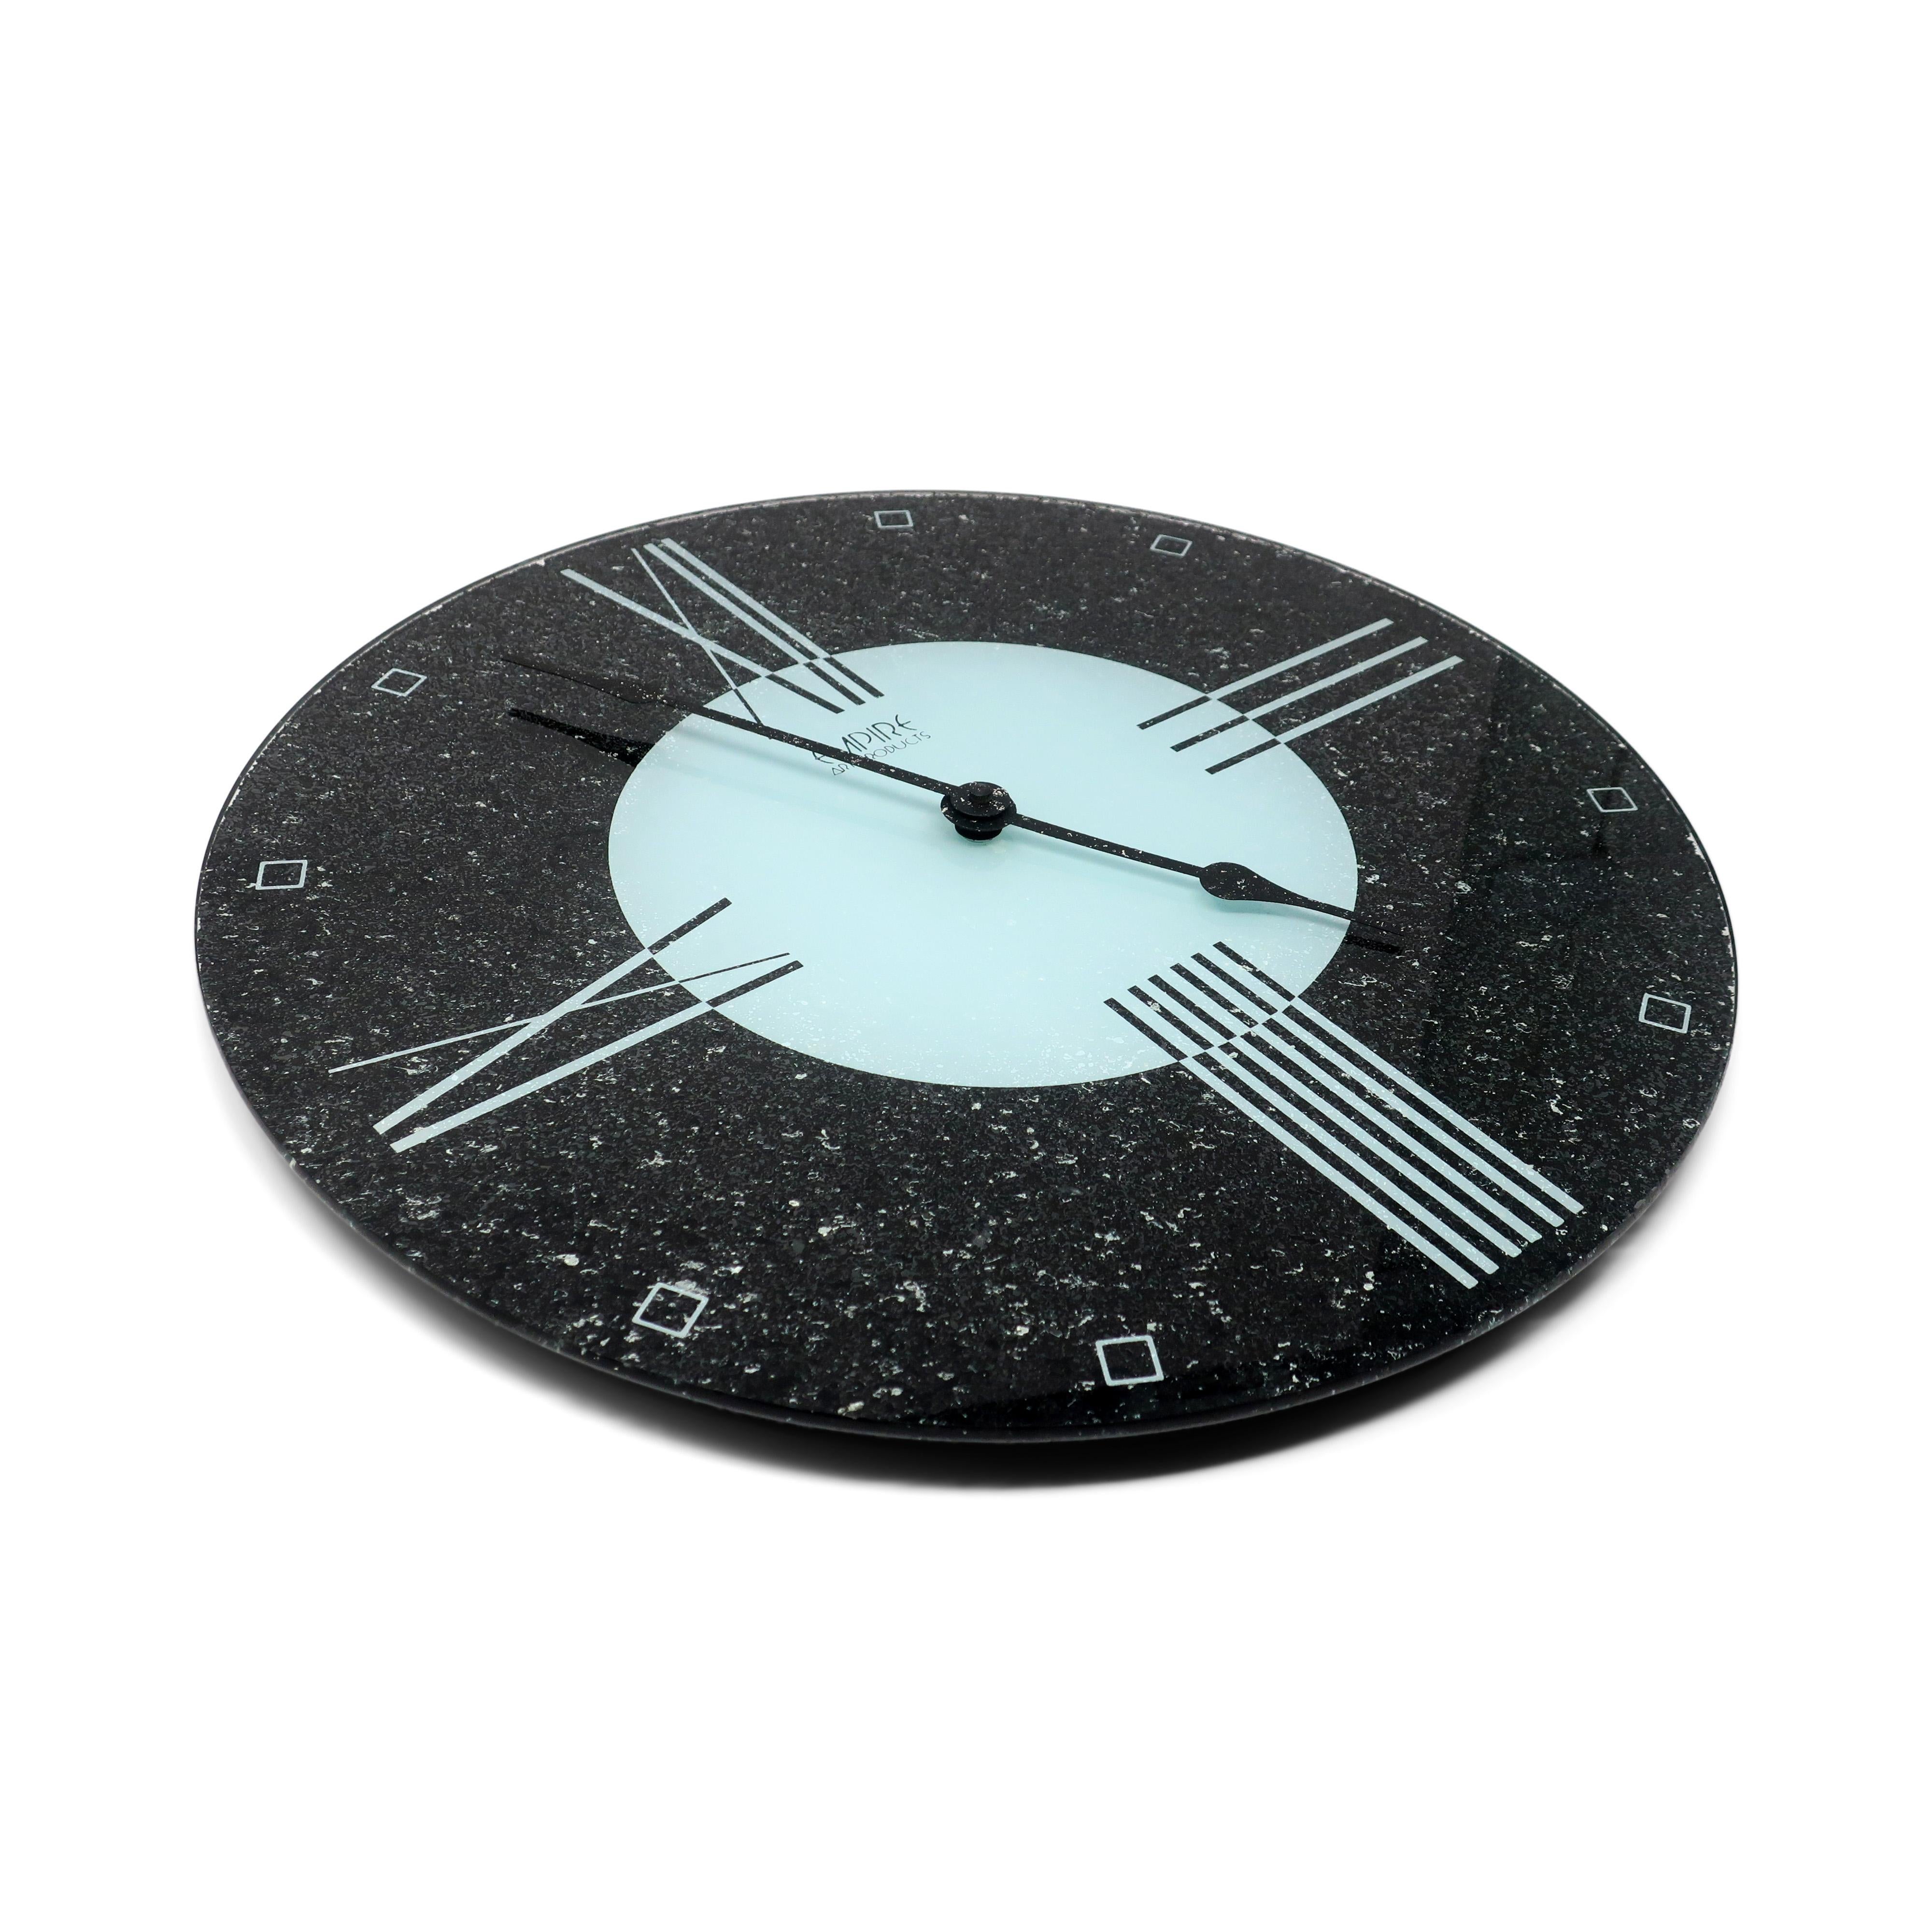 A postmodern Empire Art Products wall clock that looks like it could be straight out of a 1980s Swatch store or Pee Wee's Playhouse.  Black and light blue reverse painted glass with a speckled texture and black speckled hands.  Great 1980s Art Deco